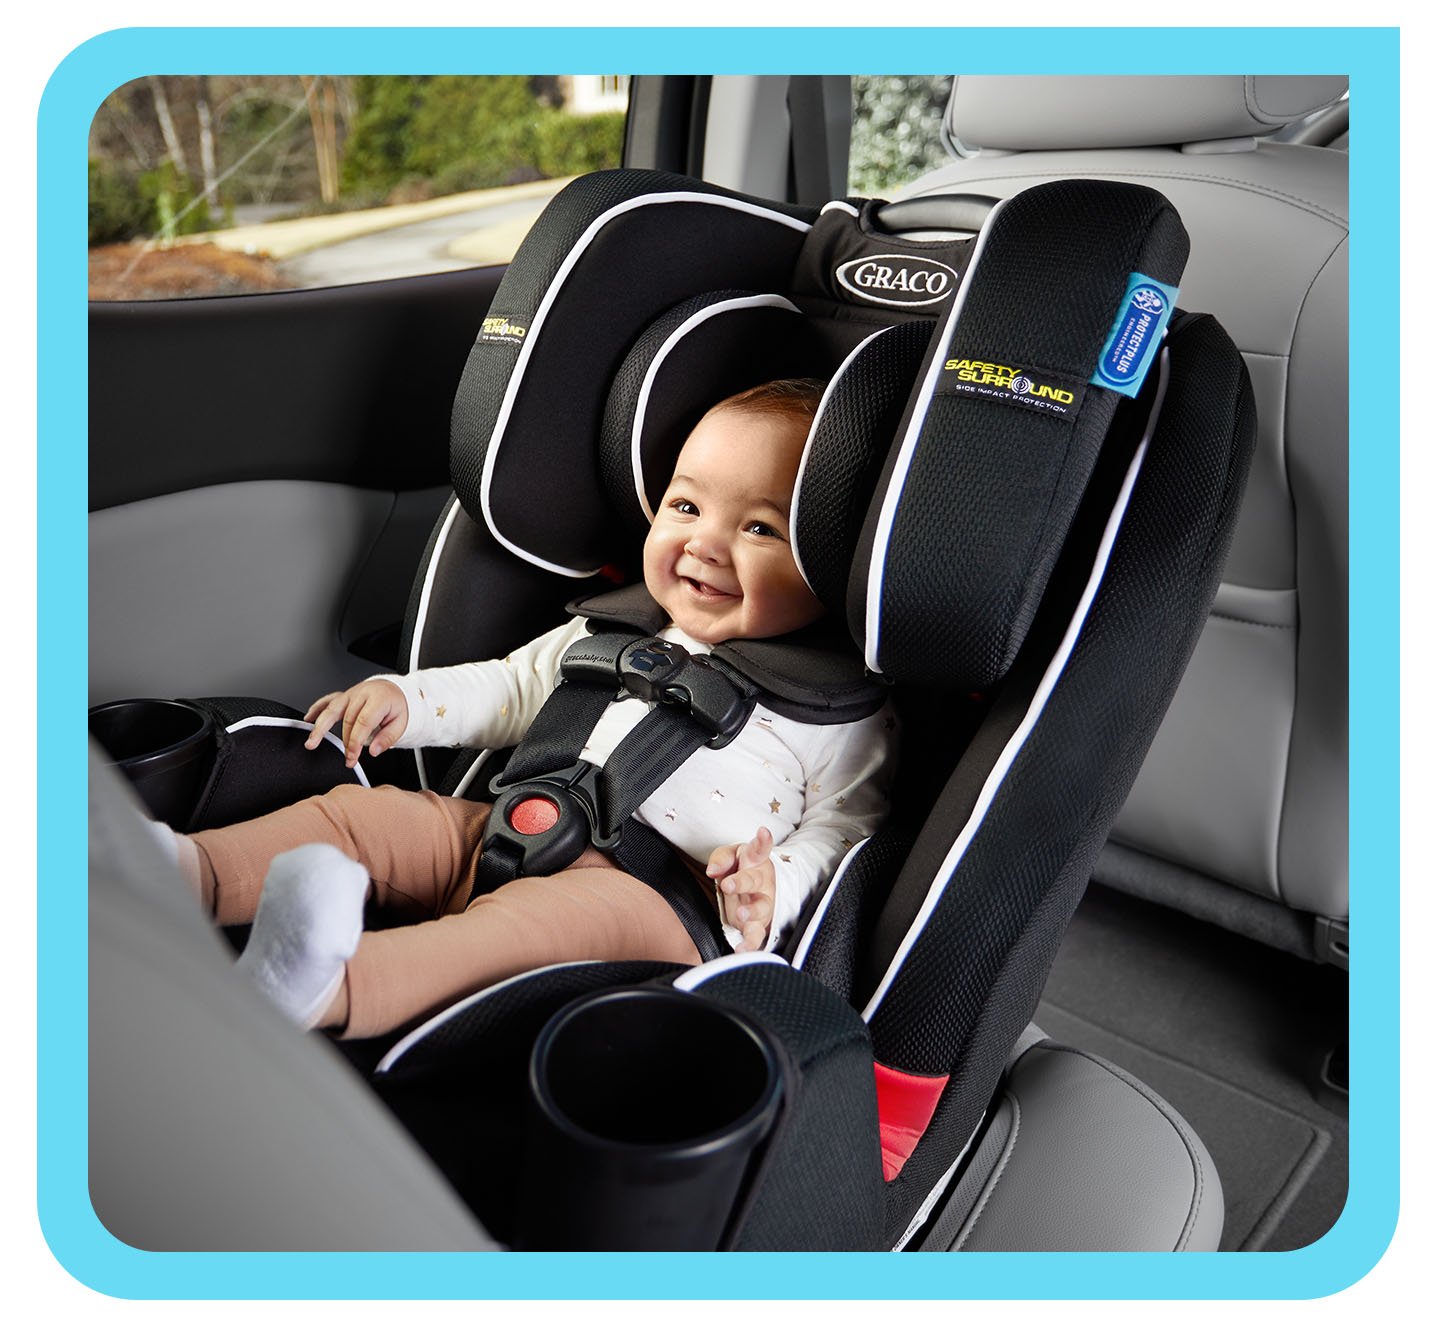 Safety Features of the Graco Forever Car Seat